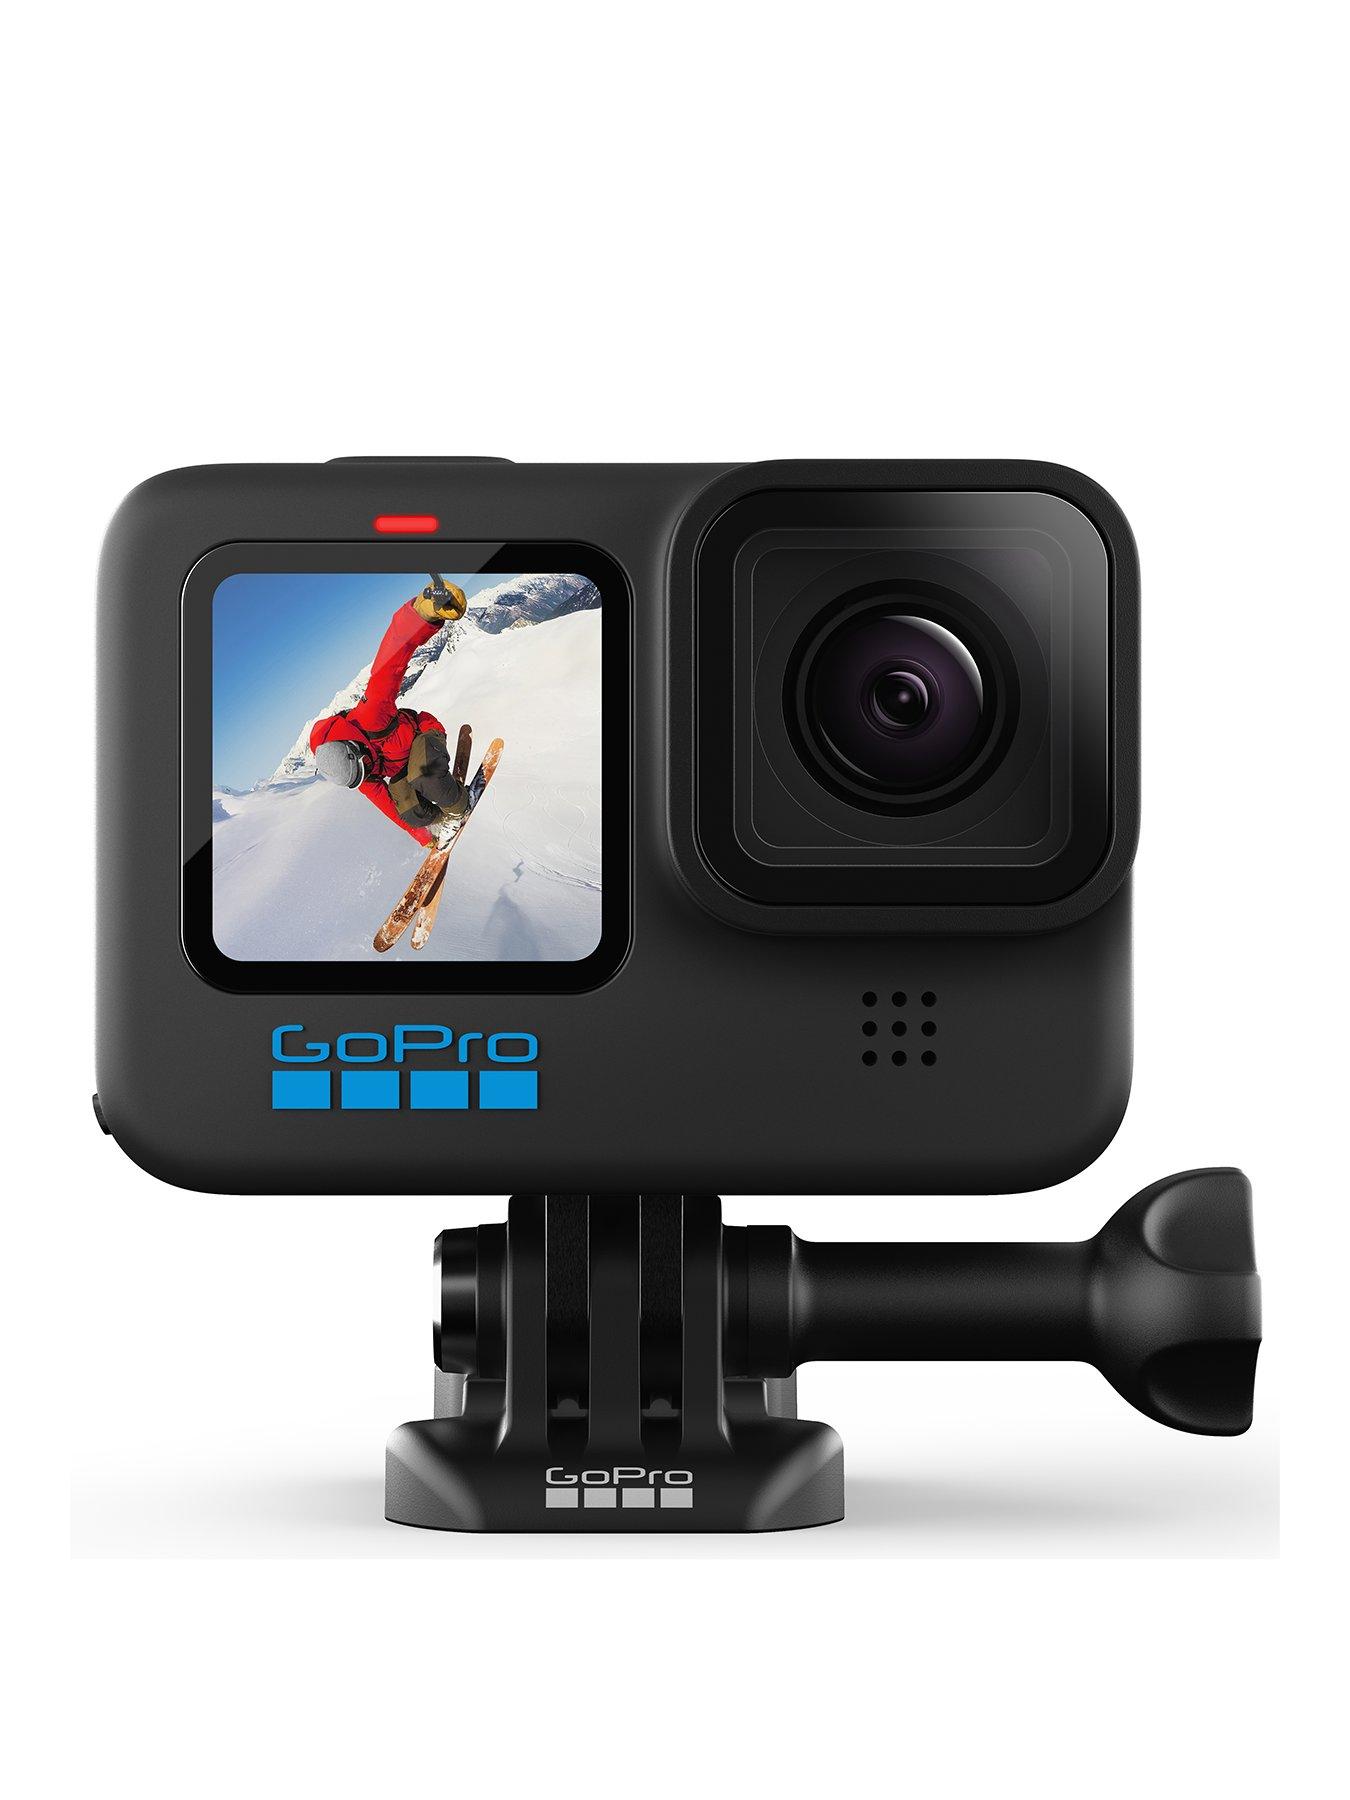 GoPro Hero 10 Black Action Camera: First-Look Review